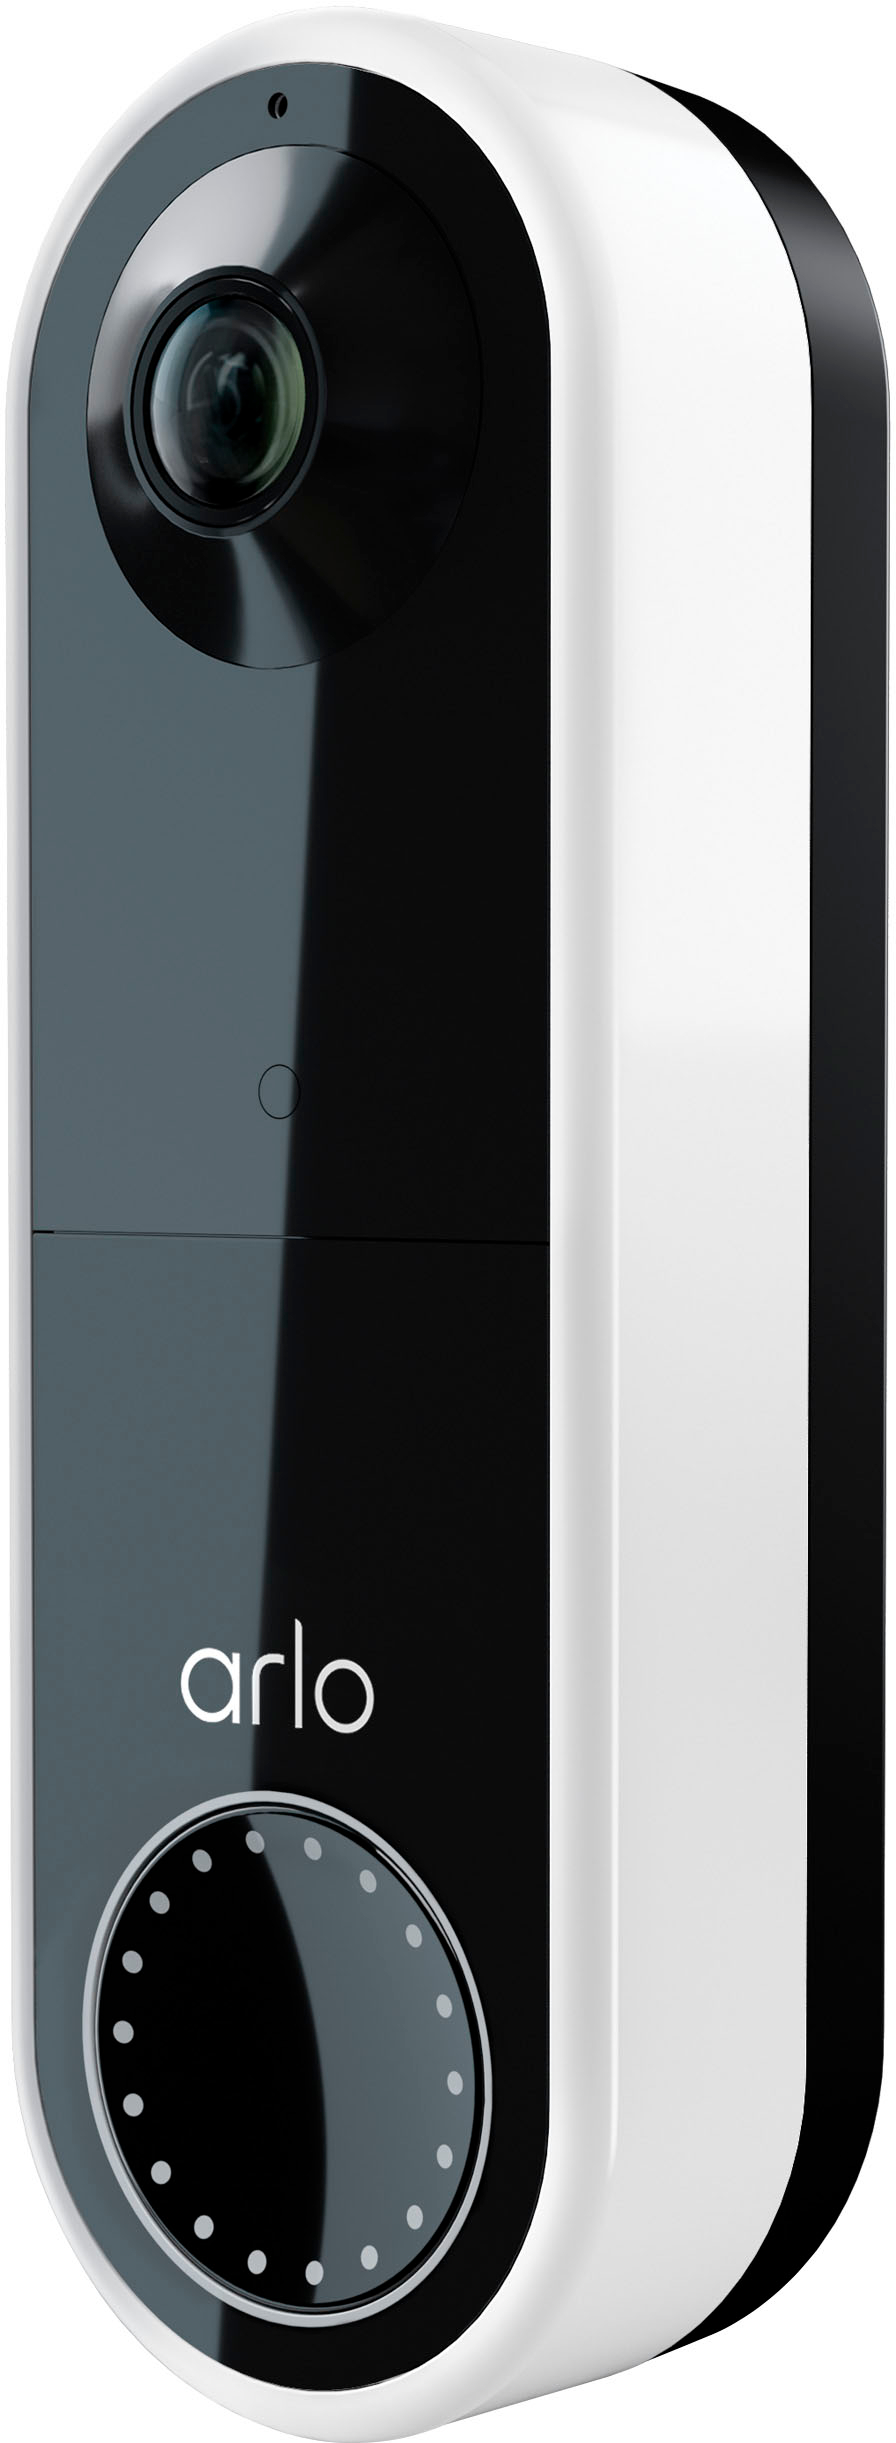 Angle View: Arlo - Essential Wi-Fi Smart Video Doorbell - Wired or Battery Operated - White